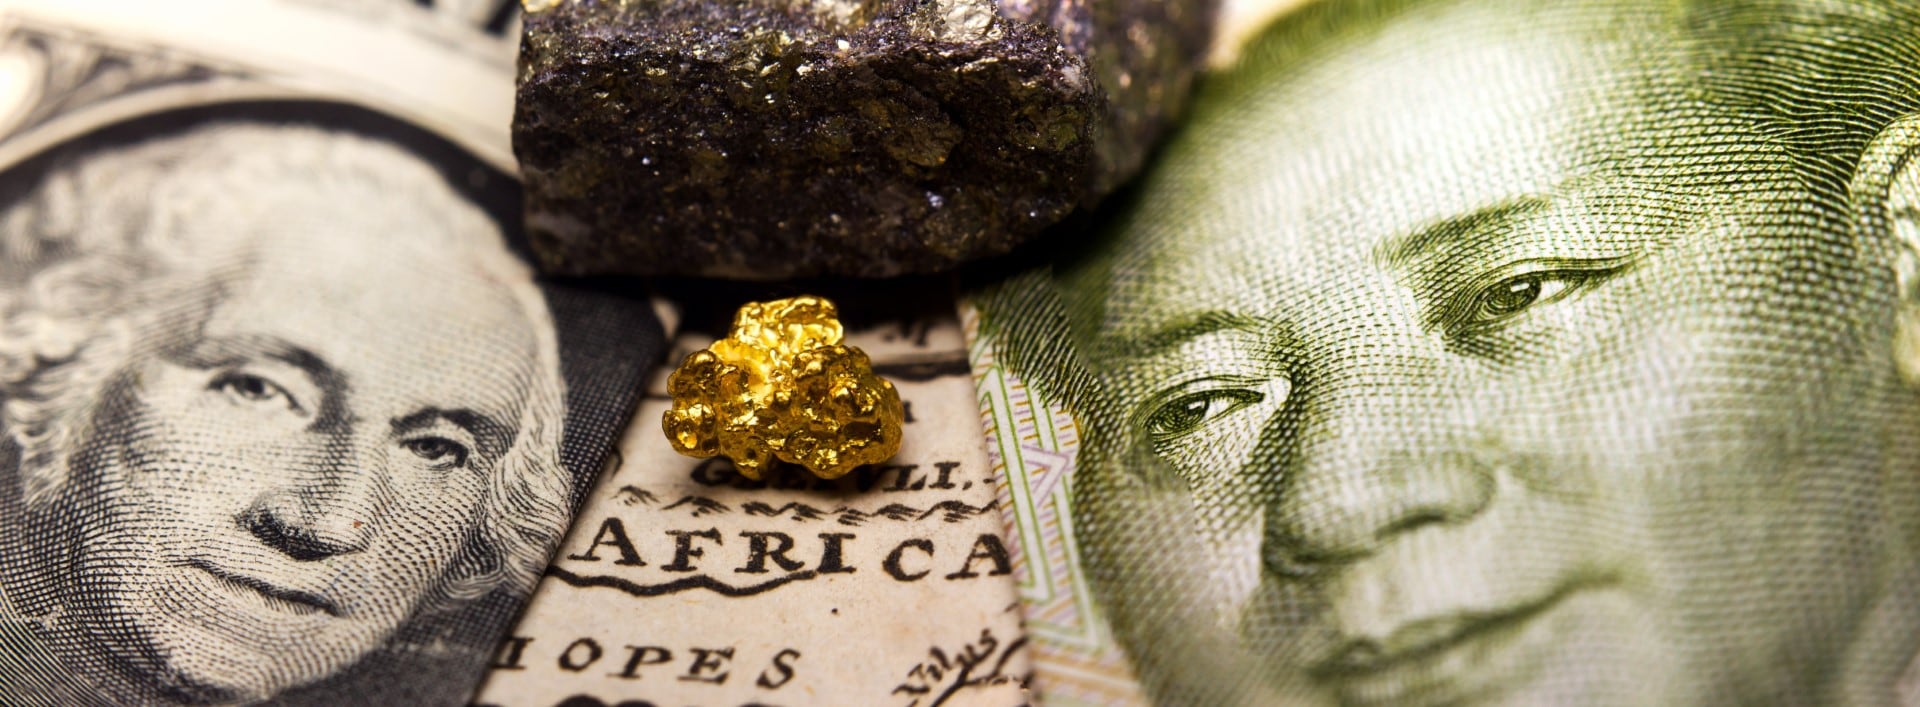 Close-up of a gold nugget / rare earth metal in between a 1 dollar note (showing George Washington) and Mao on a 1 yuan Chinese banknote  on top of an old map of Africa